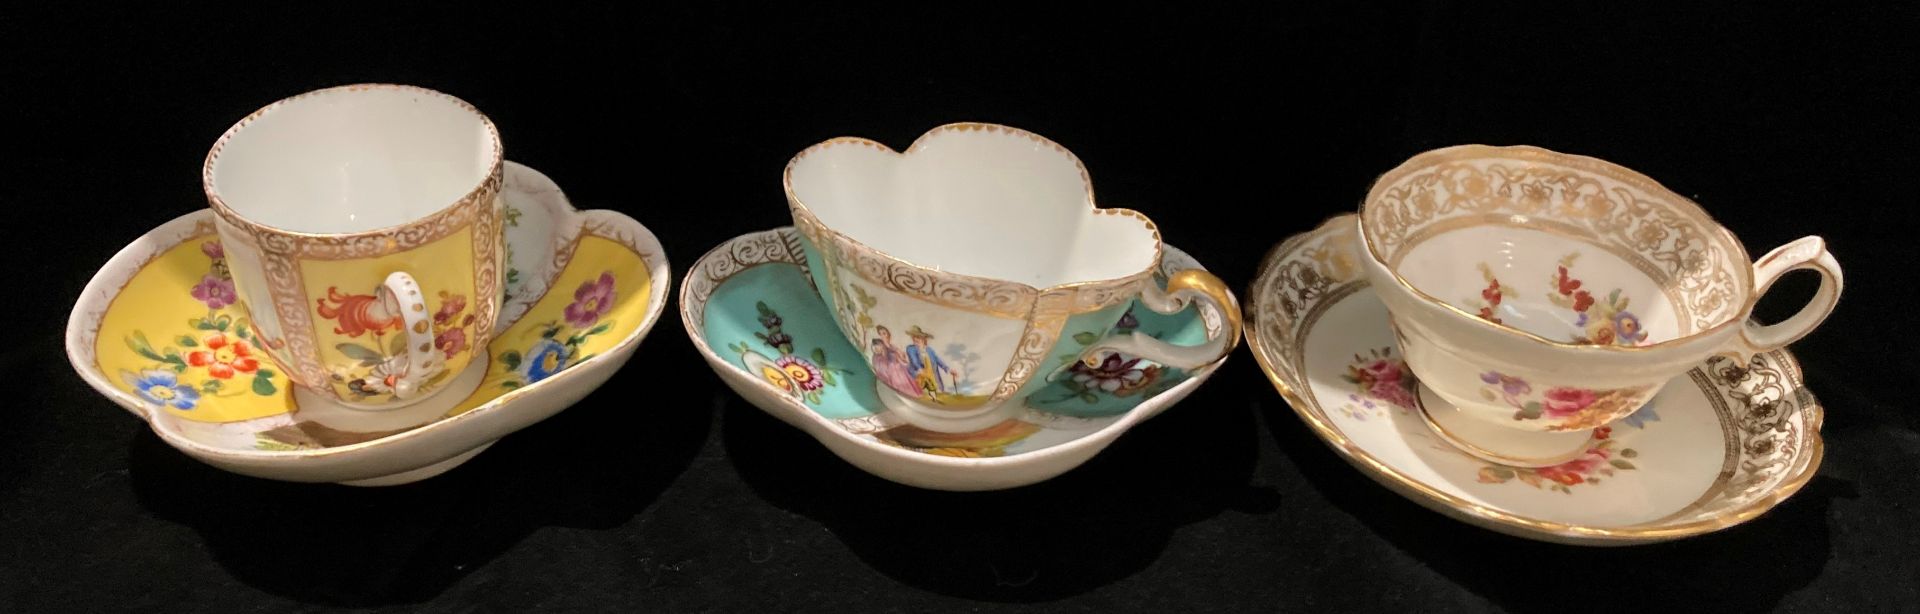 Three patterned cups and saucers - two Dresden and one Hammersley-Dresden sprays